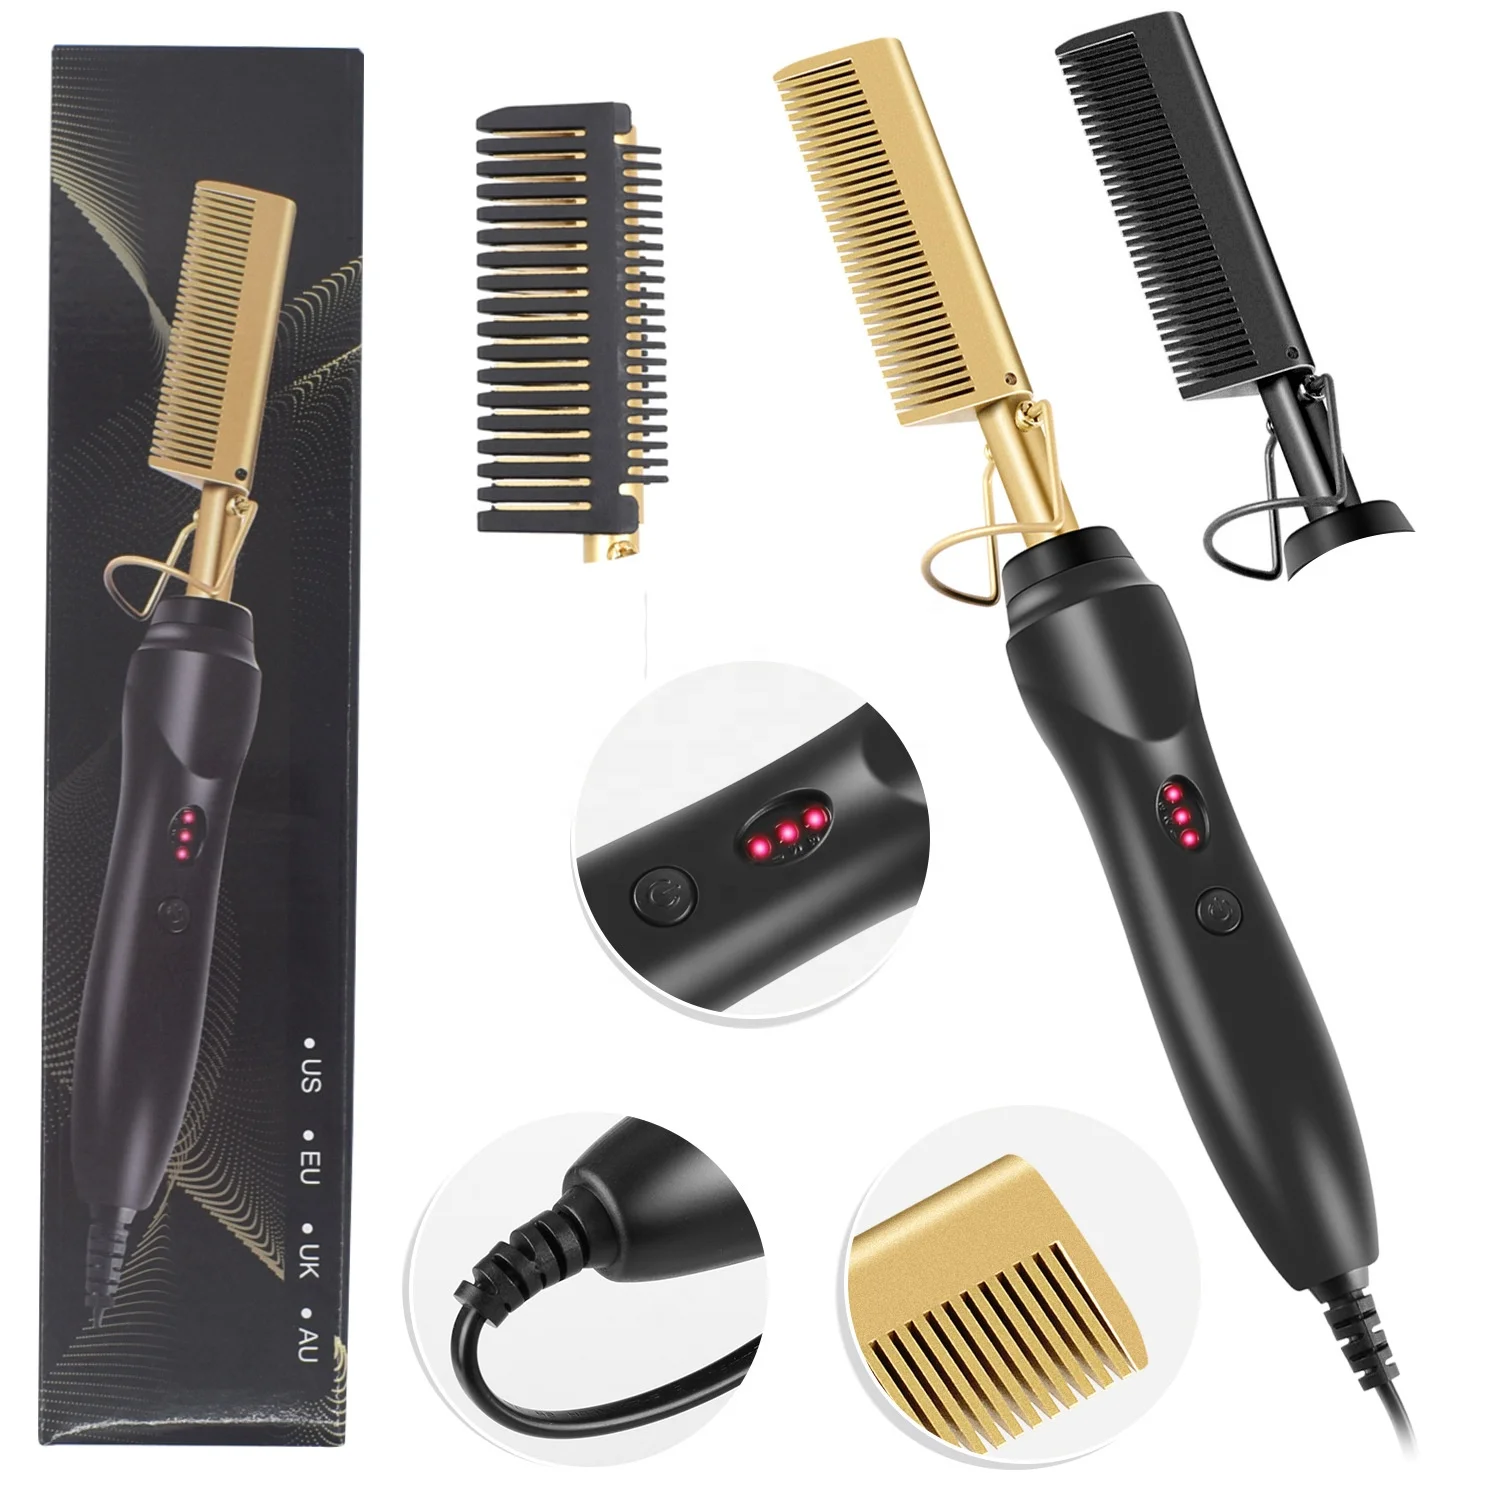 

2 in 1 Hot Comb Straightener Electric Hair Straightener Hair Curler Wet Dry Use Hair Flat Irons Hot Heating Comb